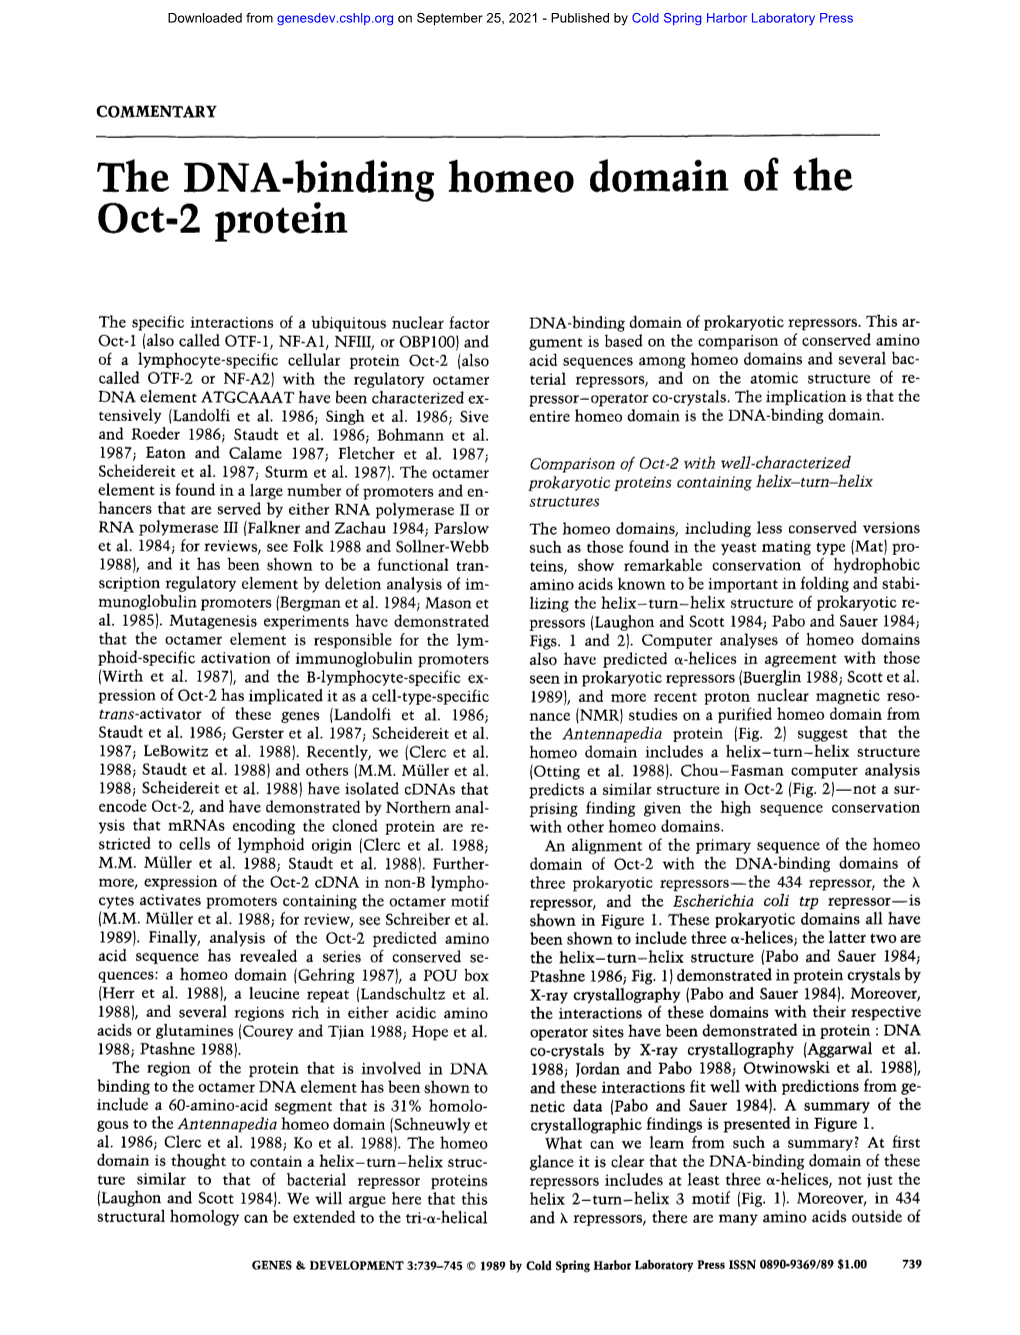 The DNA-Binding Homeo Domain of the Oct-2 Protein